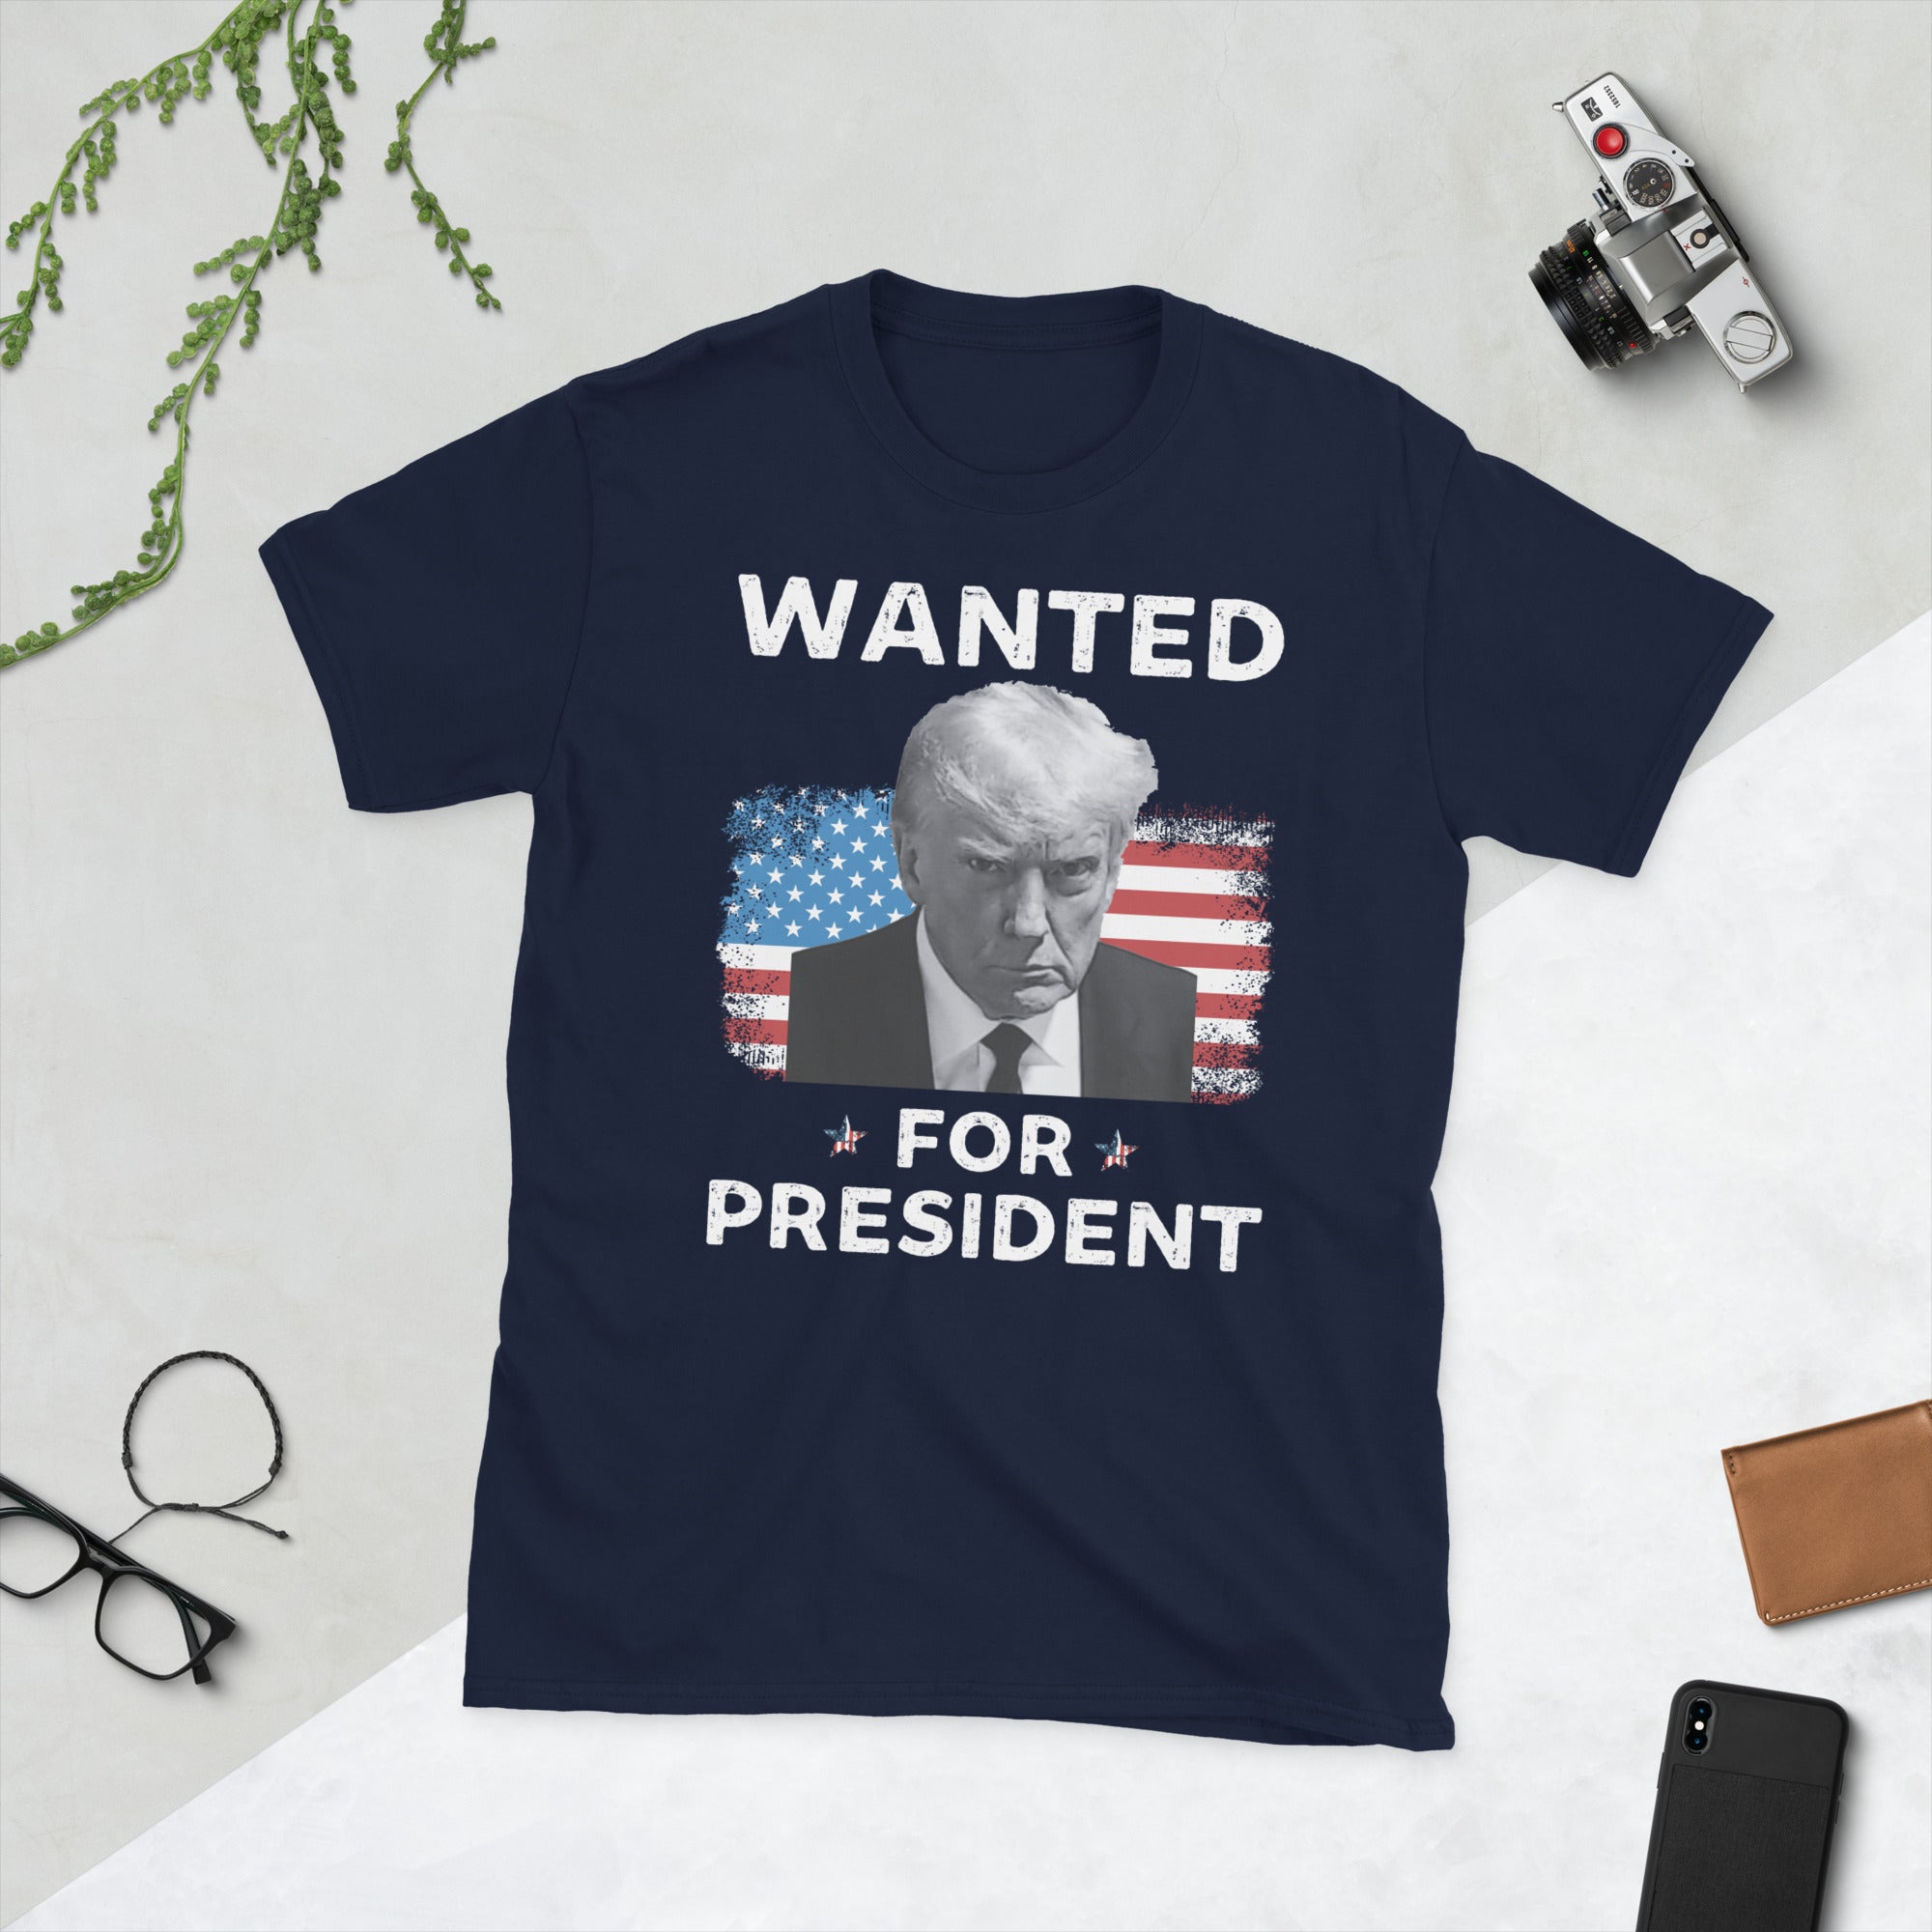 Trump Mugshot T-Shirt, Wanted For President Shirt, Trump Arrested, Donald Trump 2024, Legend Trump, Never Surrender Tee, Republican Gifts - Madeinsea©